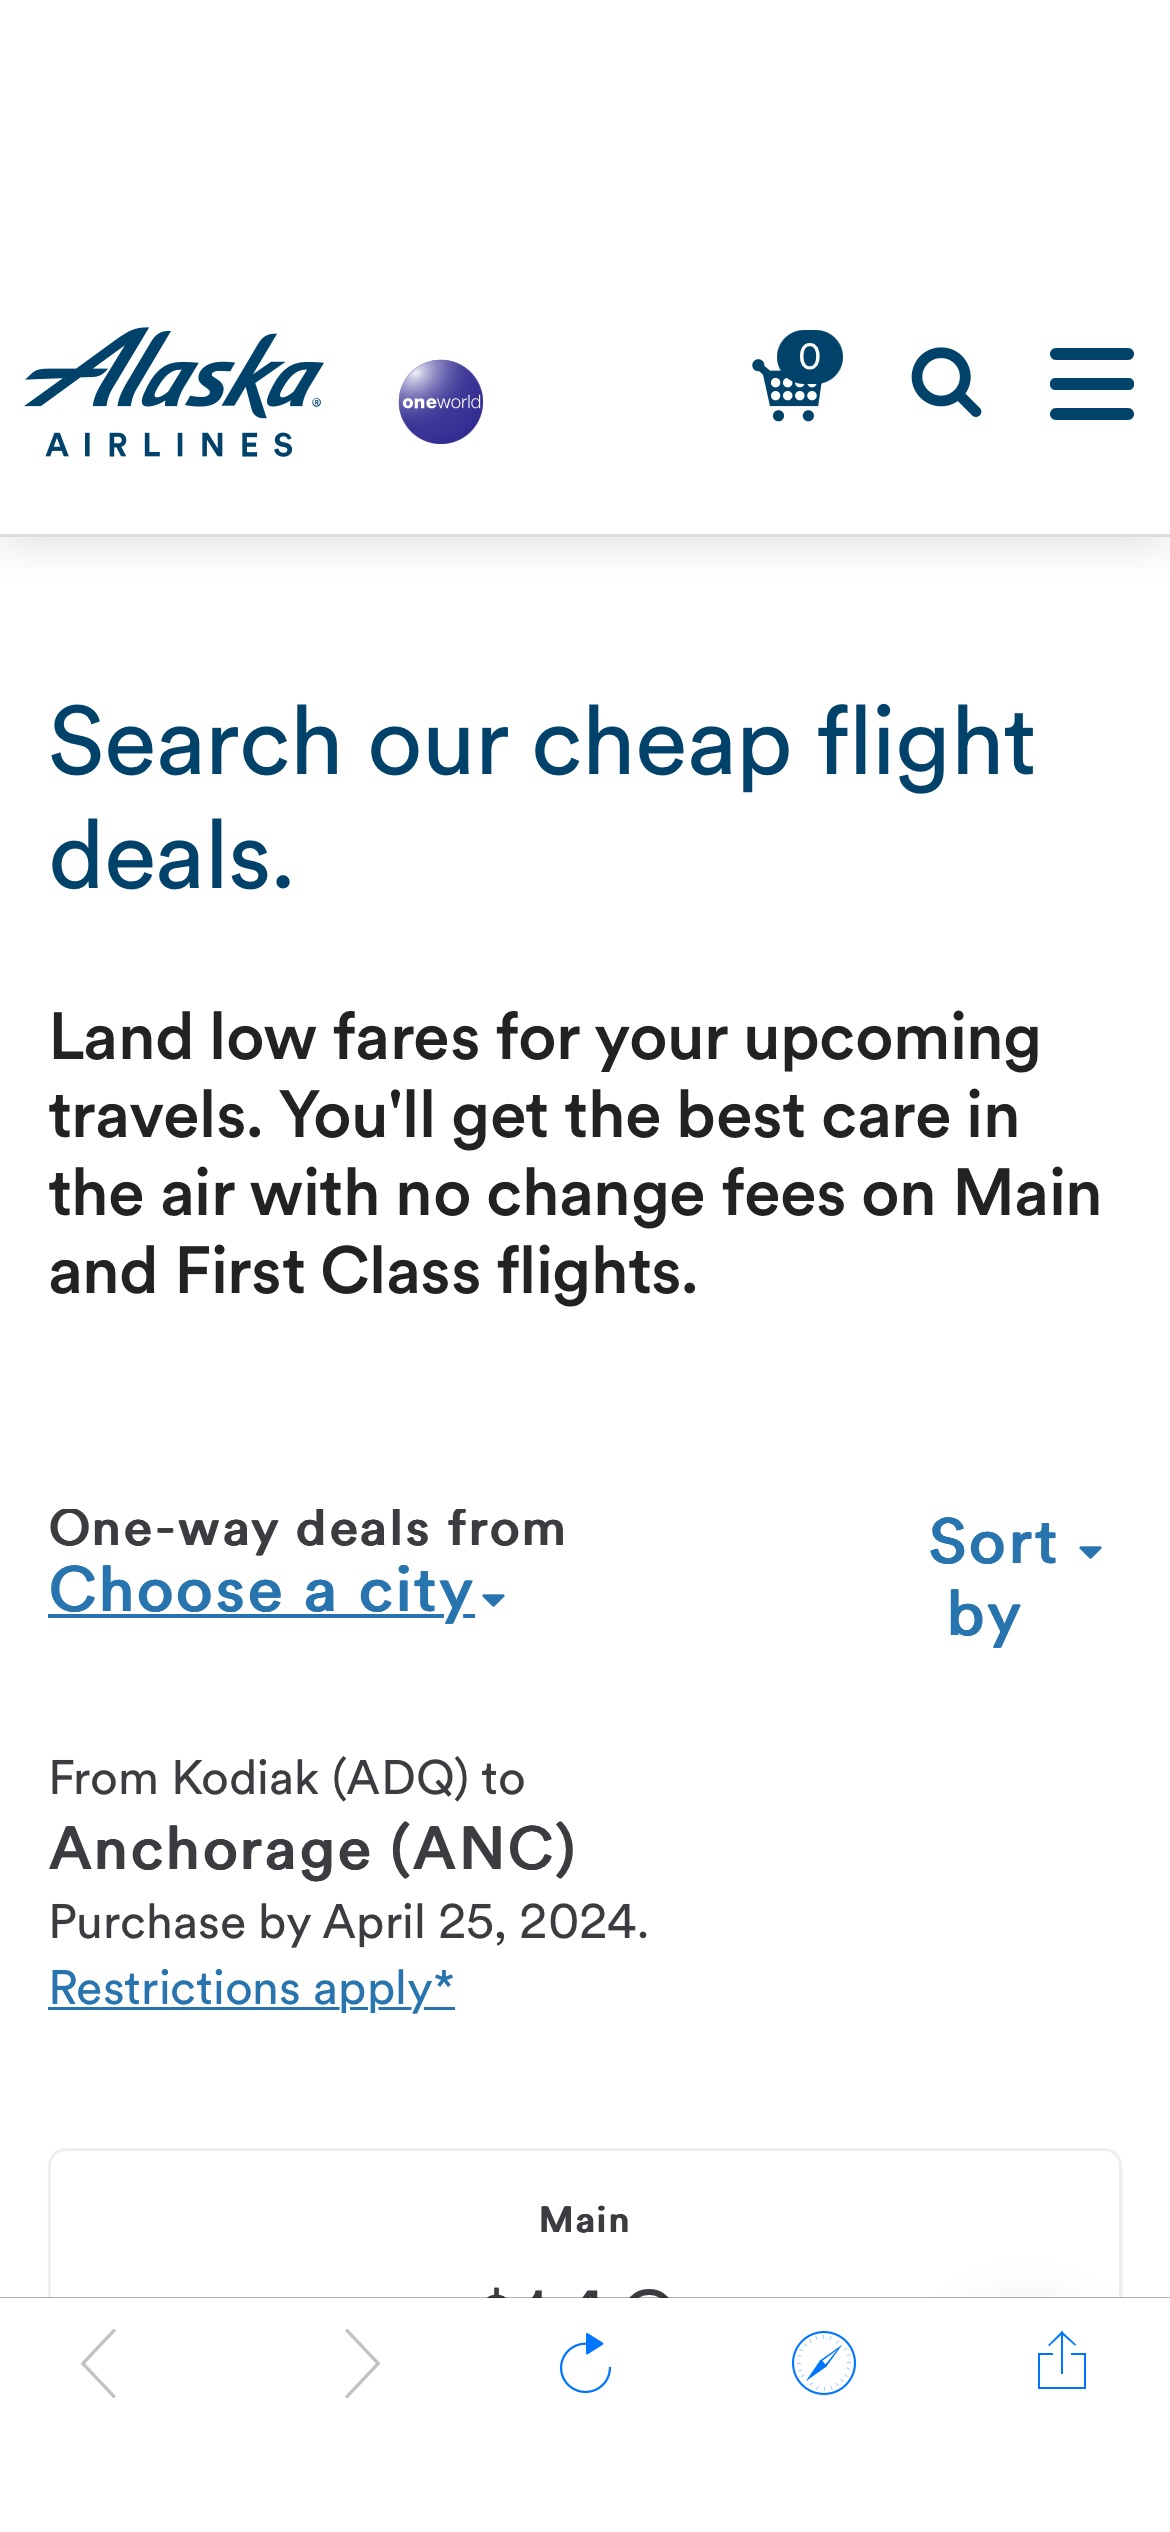 View our airfare deals and book your cheap flight today - Alaska Airlines